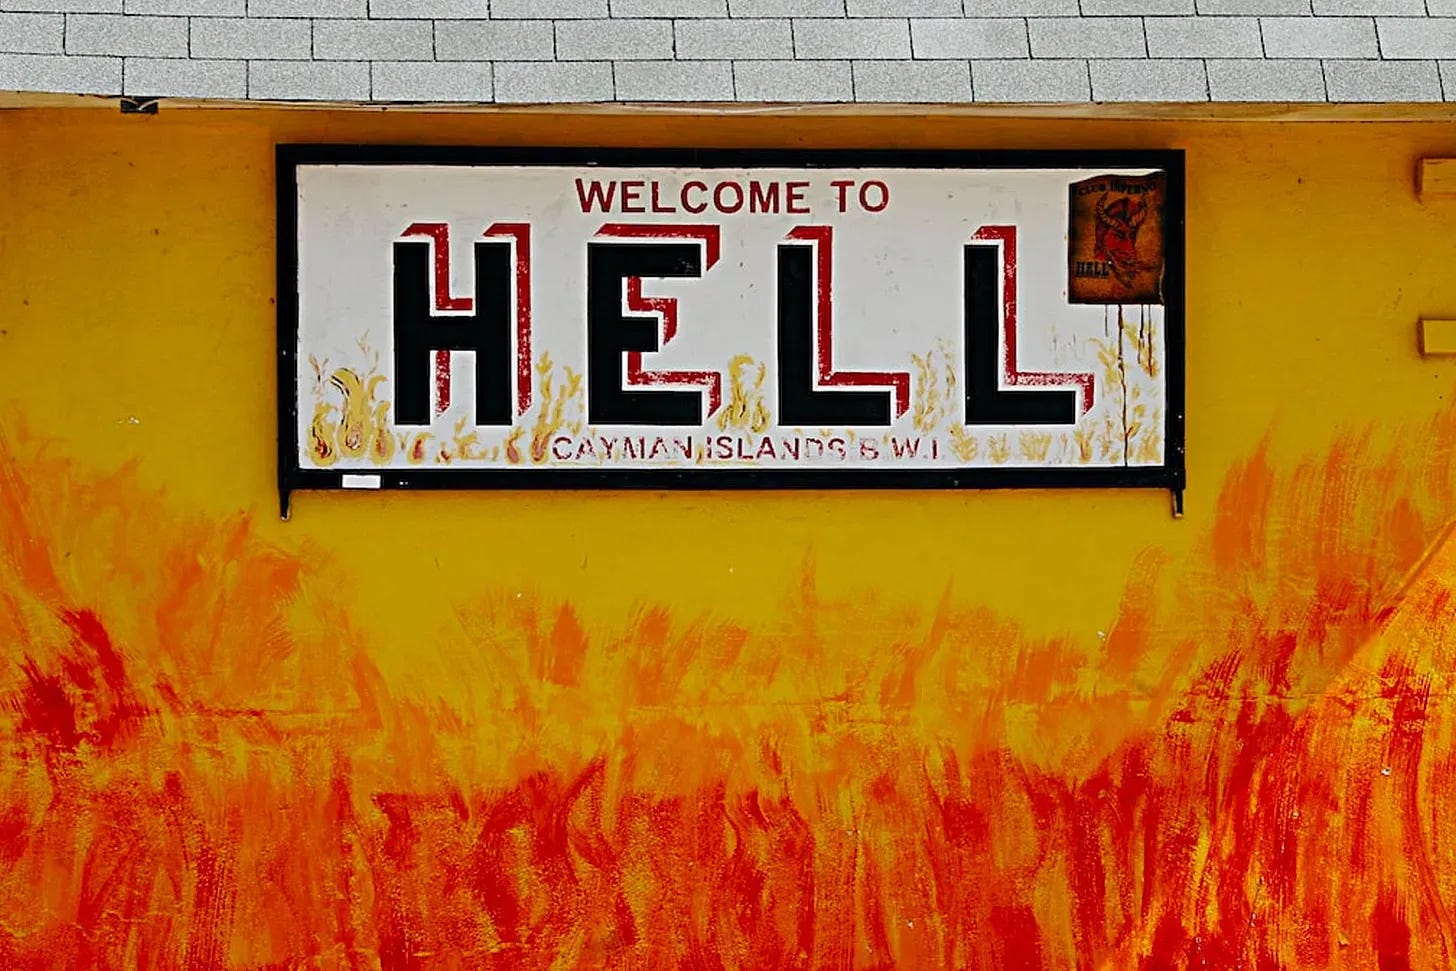 A sign saying "Welcome to Hell"